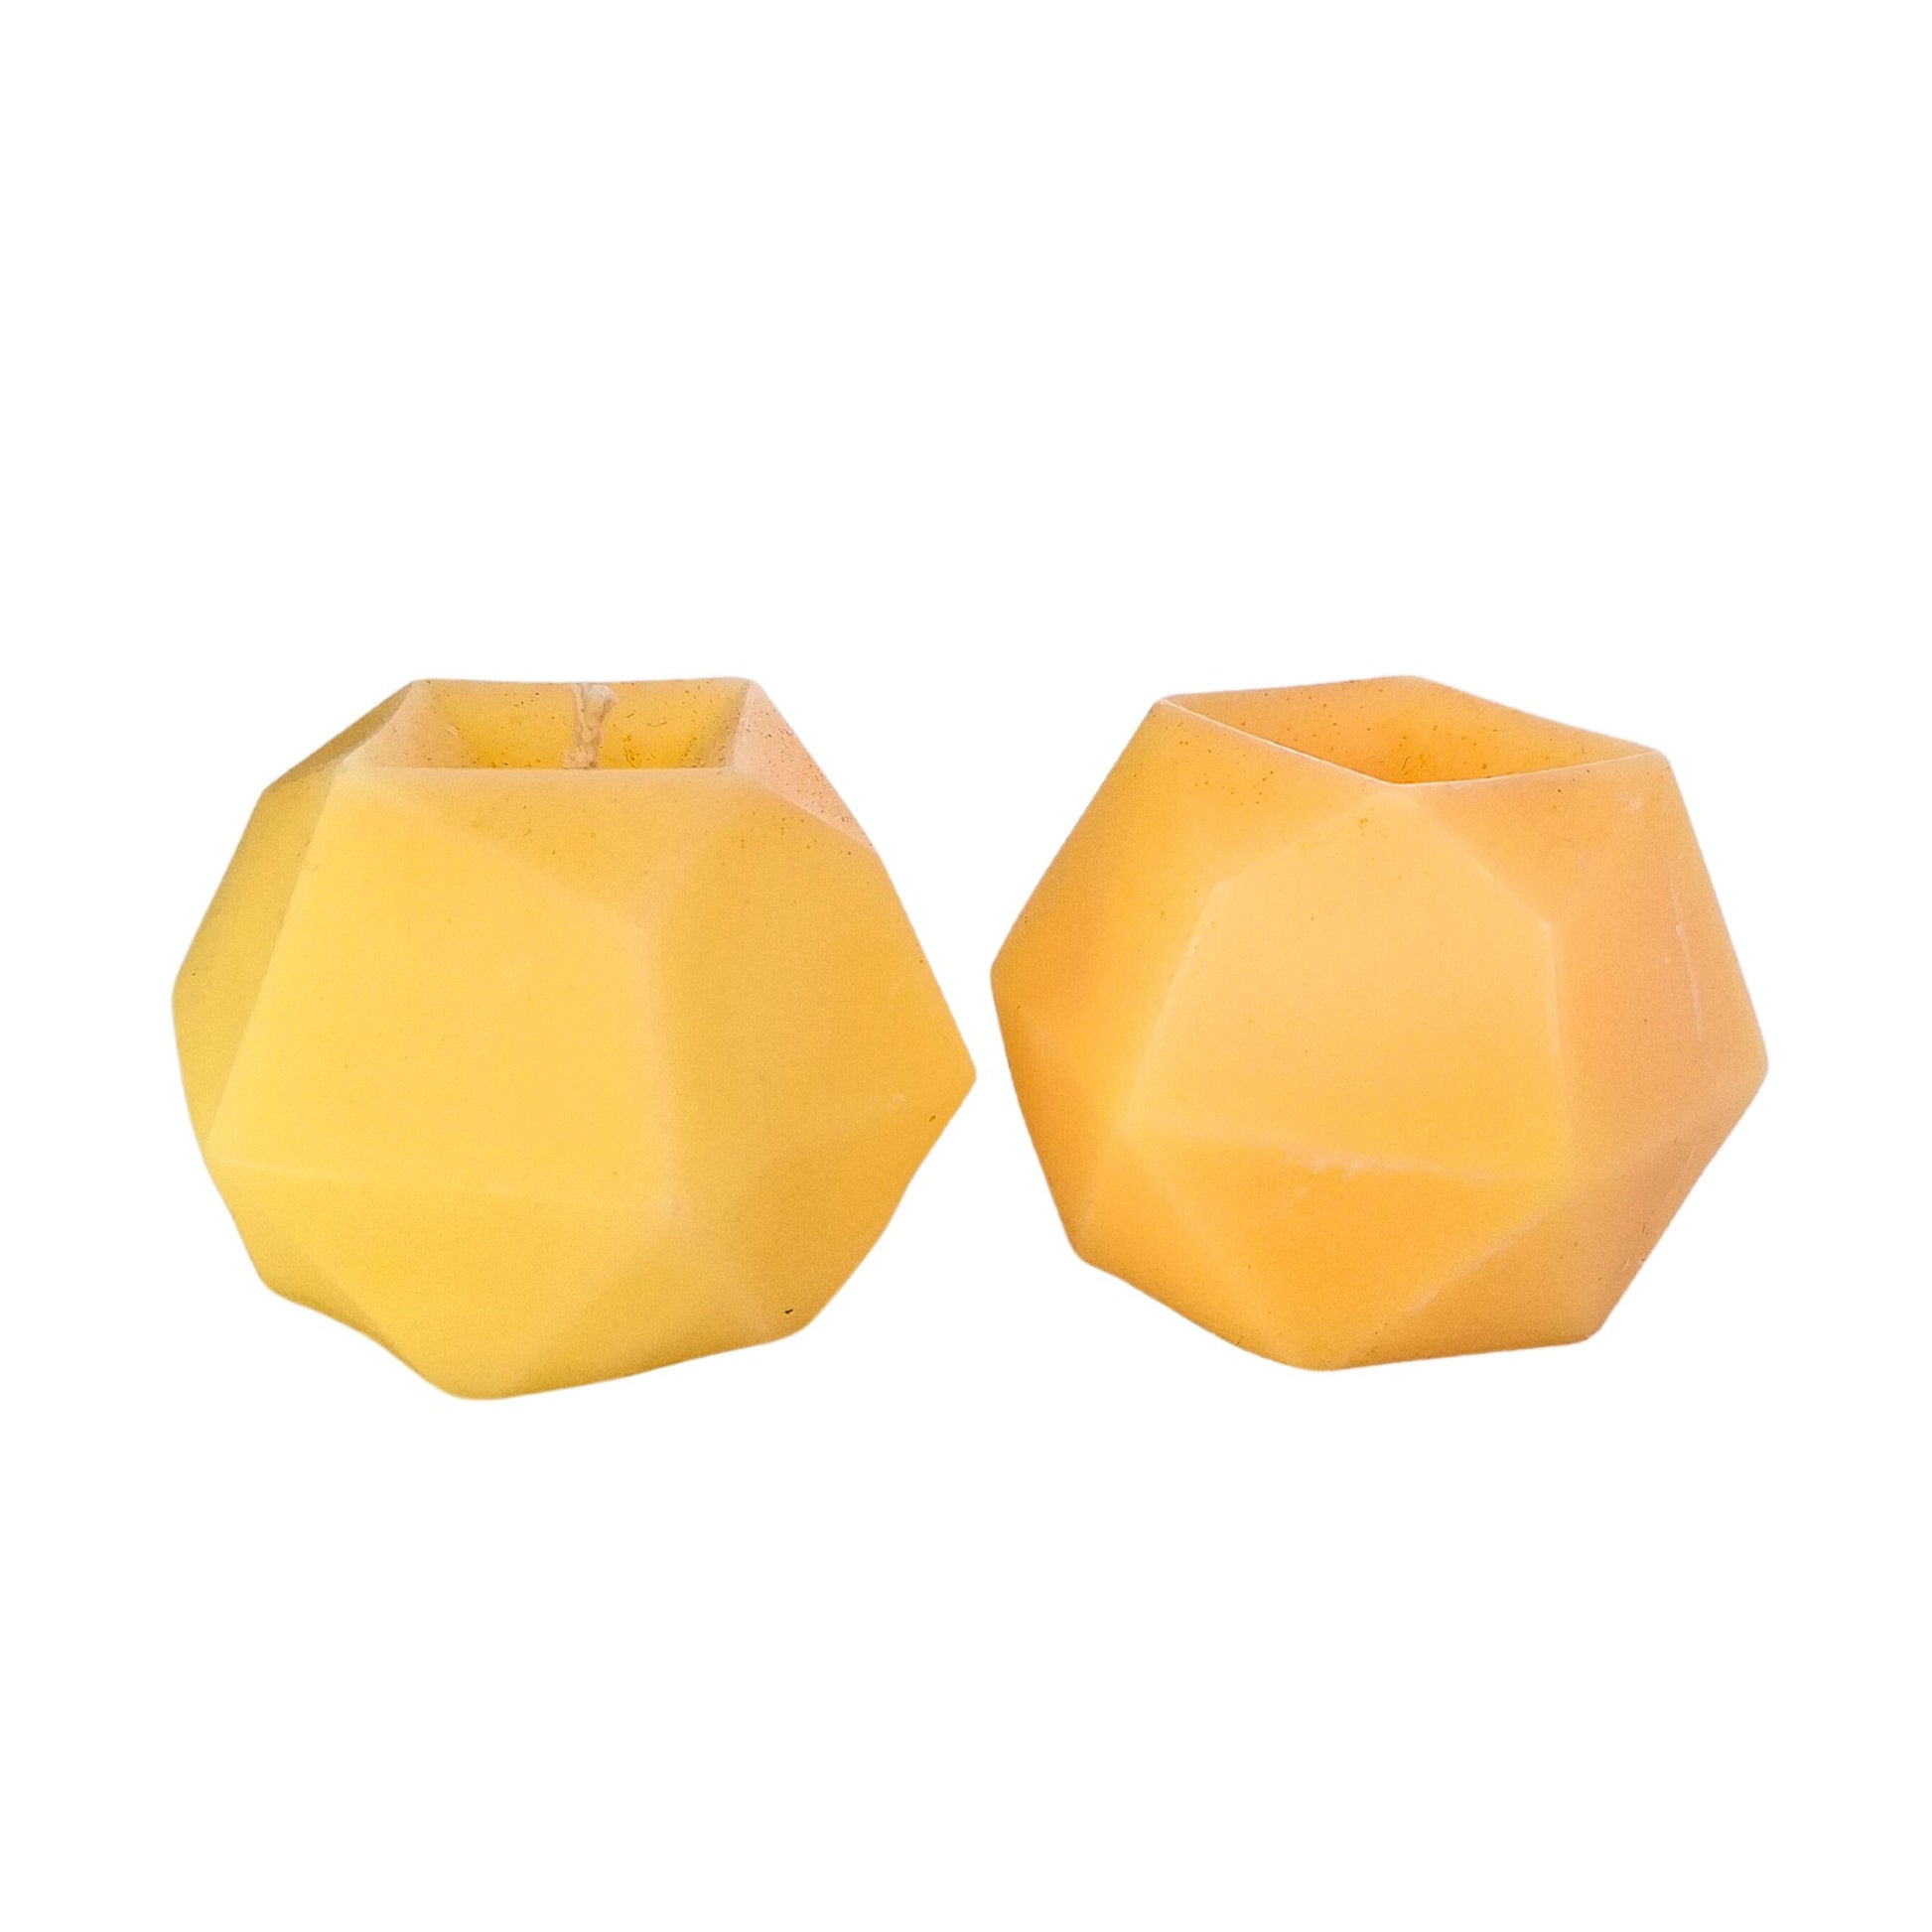 Candle Color Dye Blocks - Soft Yellow - Pacifrica - CDBSY